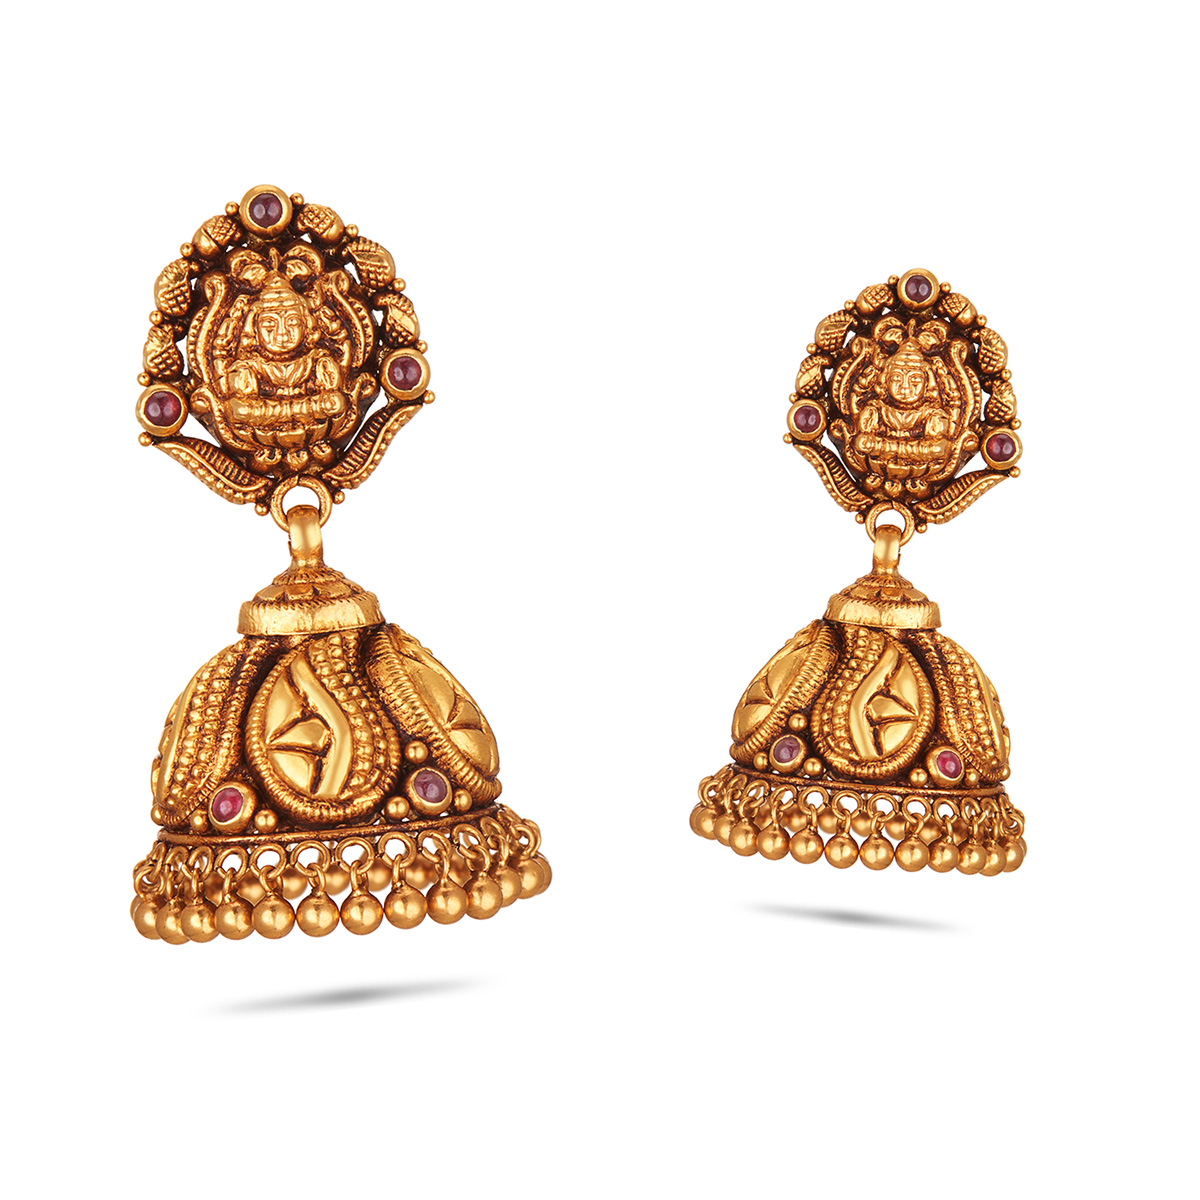 Wholesale Solid gold fine jewelry earrings for woman made of gold 22 carat latest collections